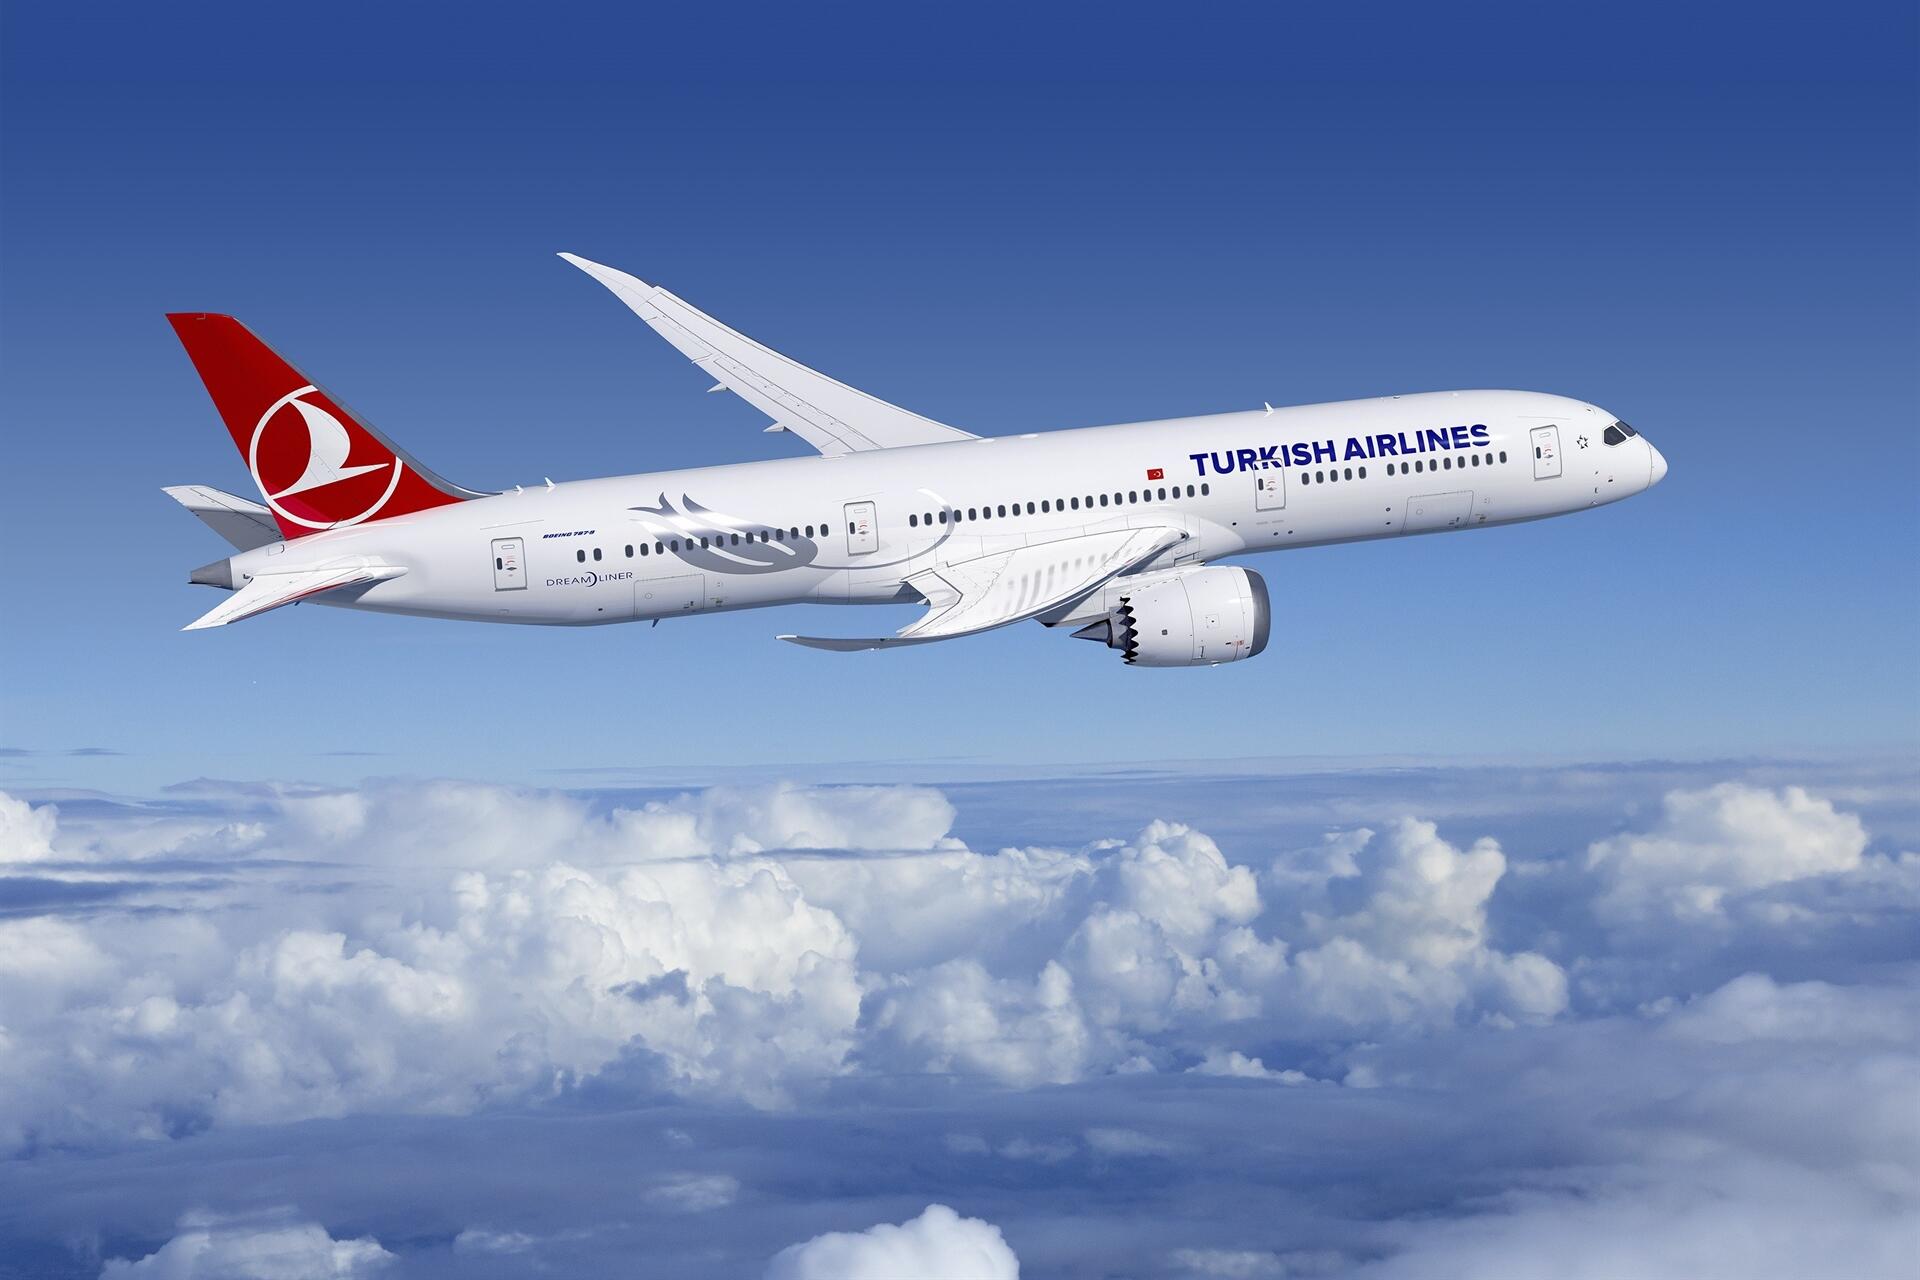 turkish airlines booking